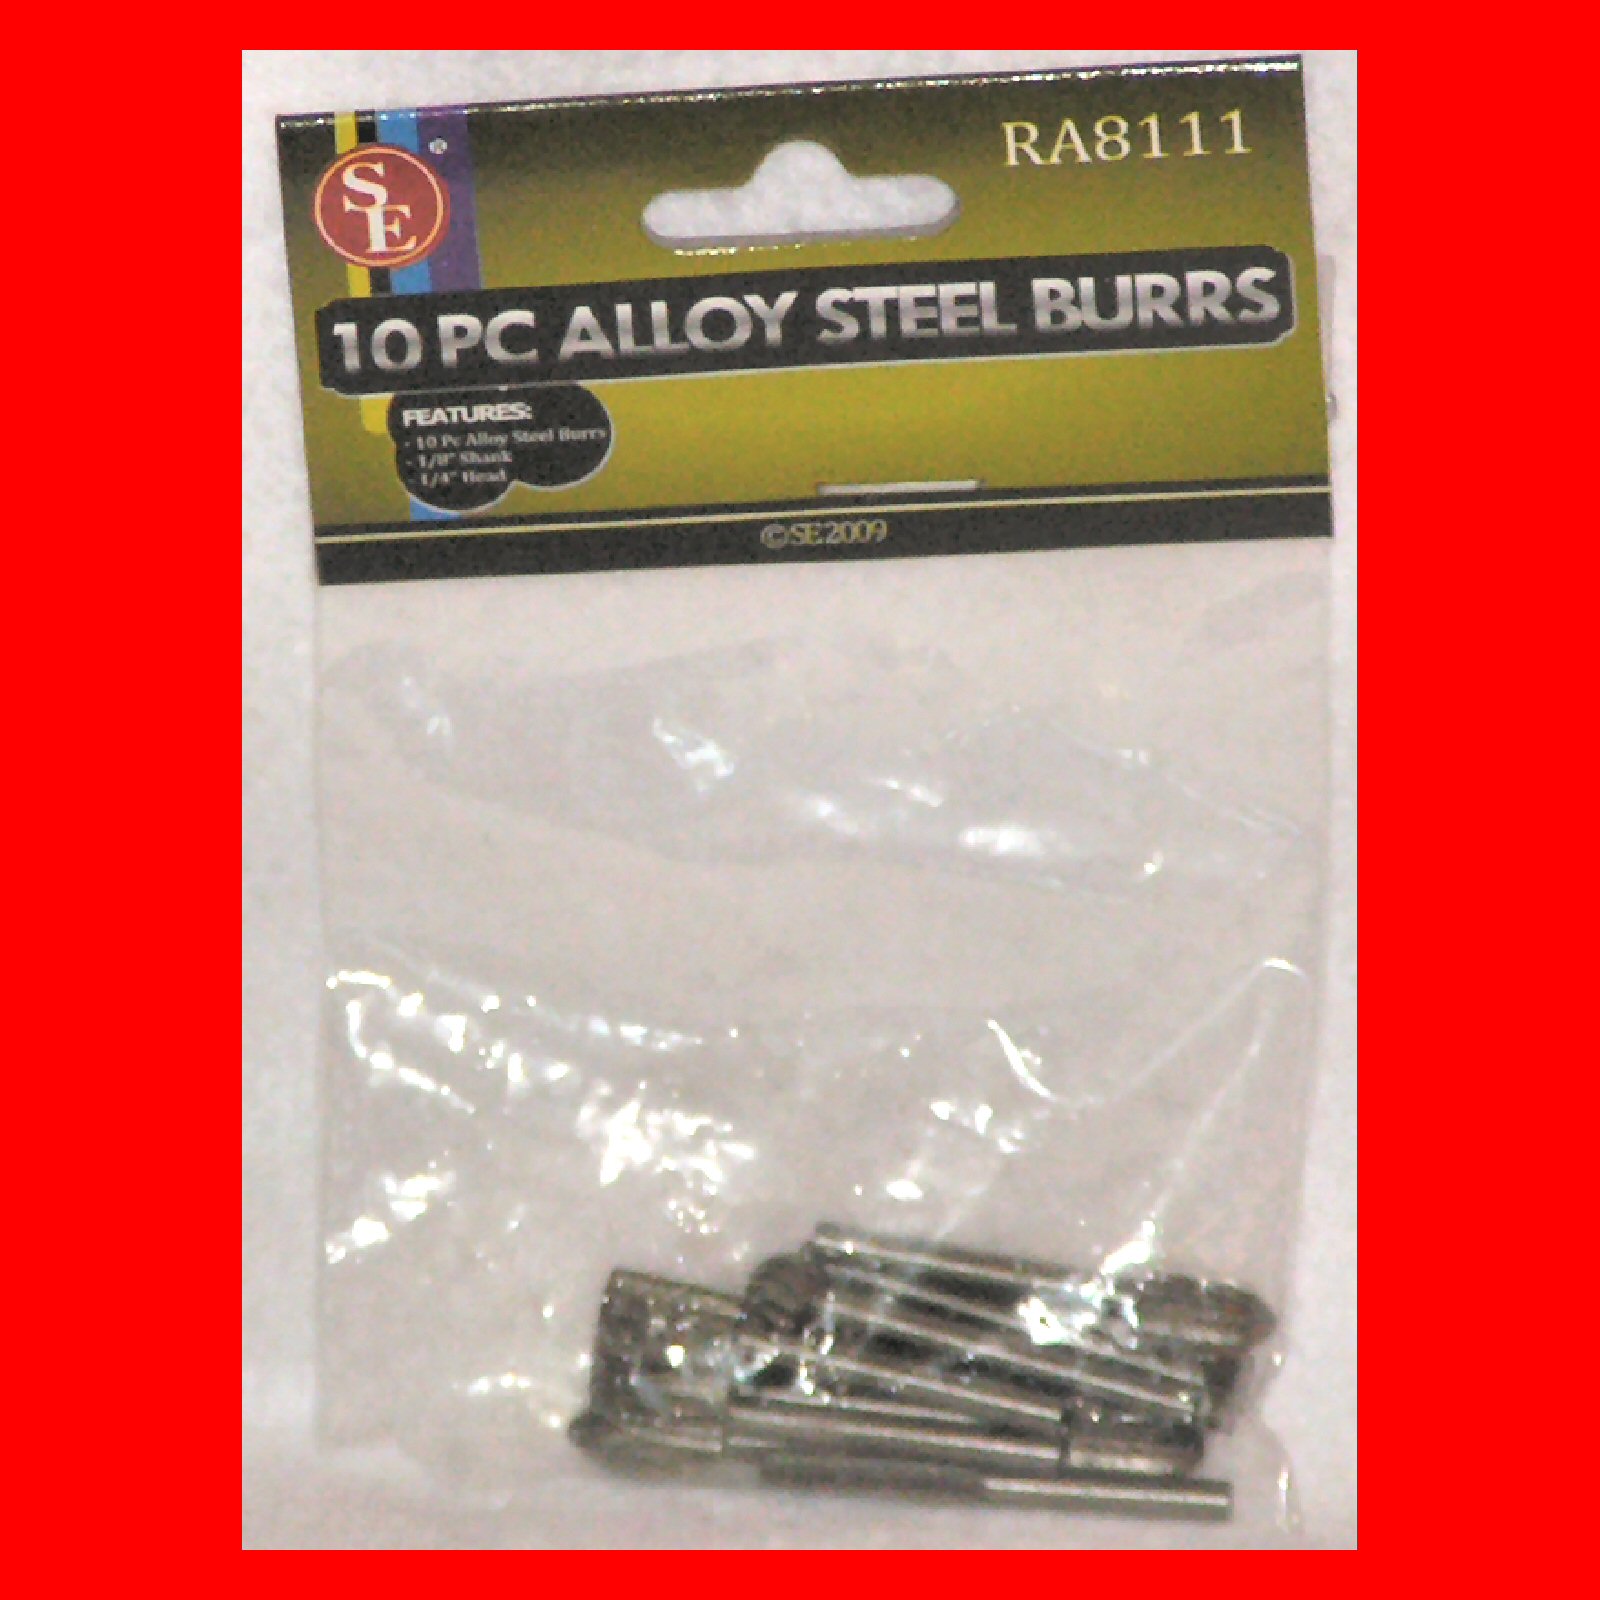 10-pc Rotary Tool Alloy Steel Burrs 1/4-inch Heads - Click Image to Close